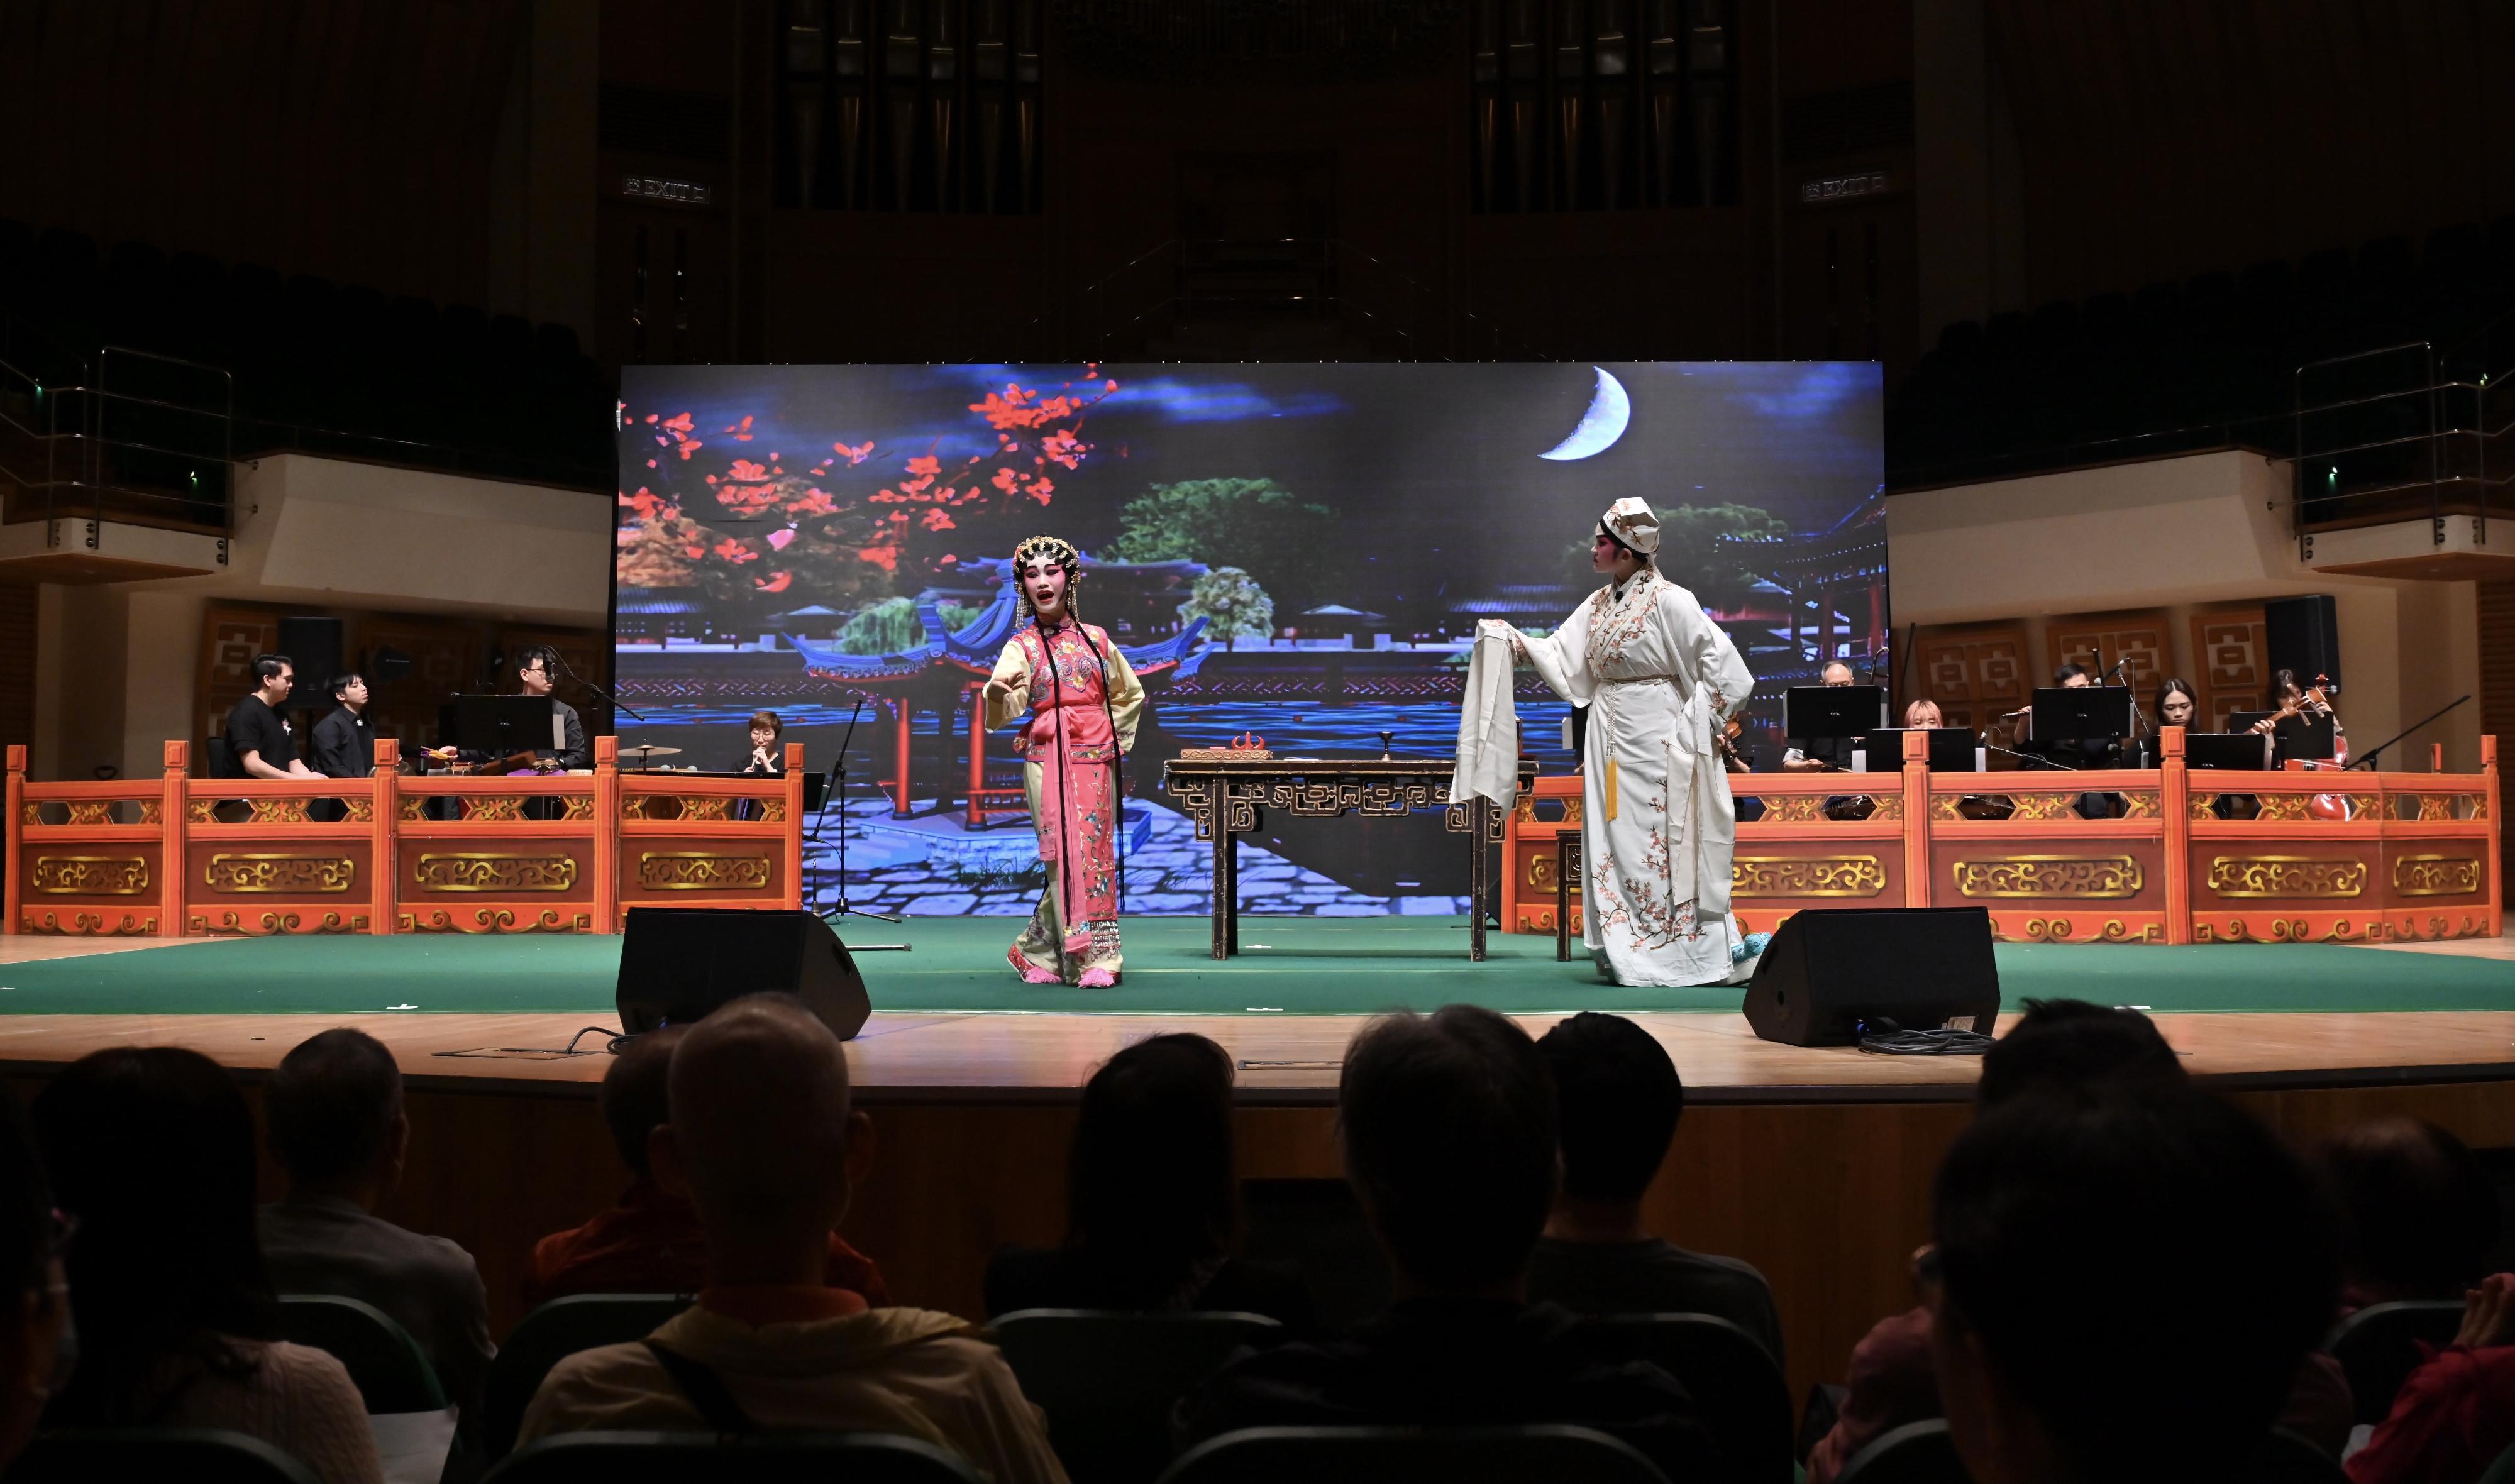 The annual Cantonese Opera Day, presented by the Leisure and Cultural Services Department, was held this afternoon (November 26). Photo shows young Cantonese opera talents performing onstage in the "Cantonese Opera Excerpts" performance.